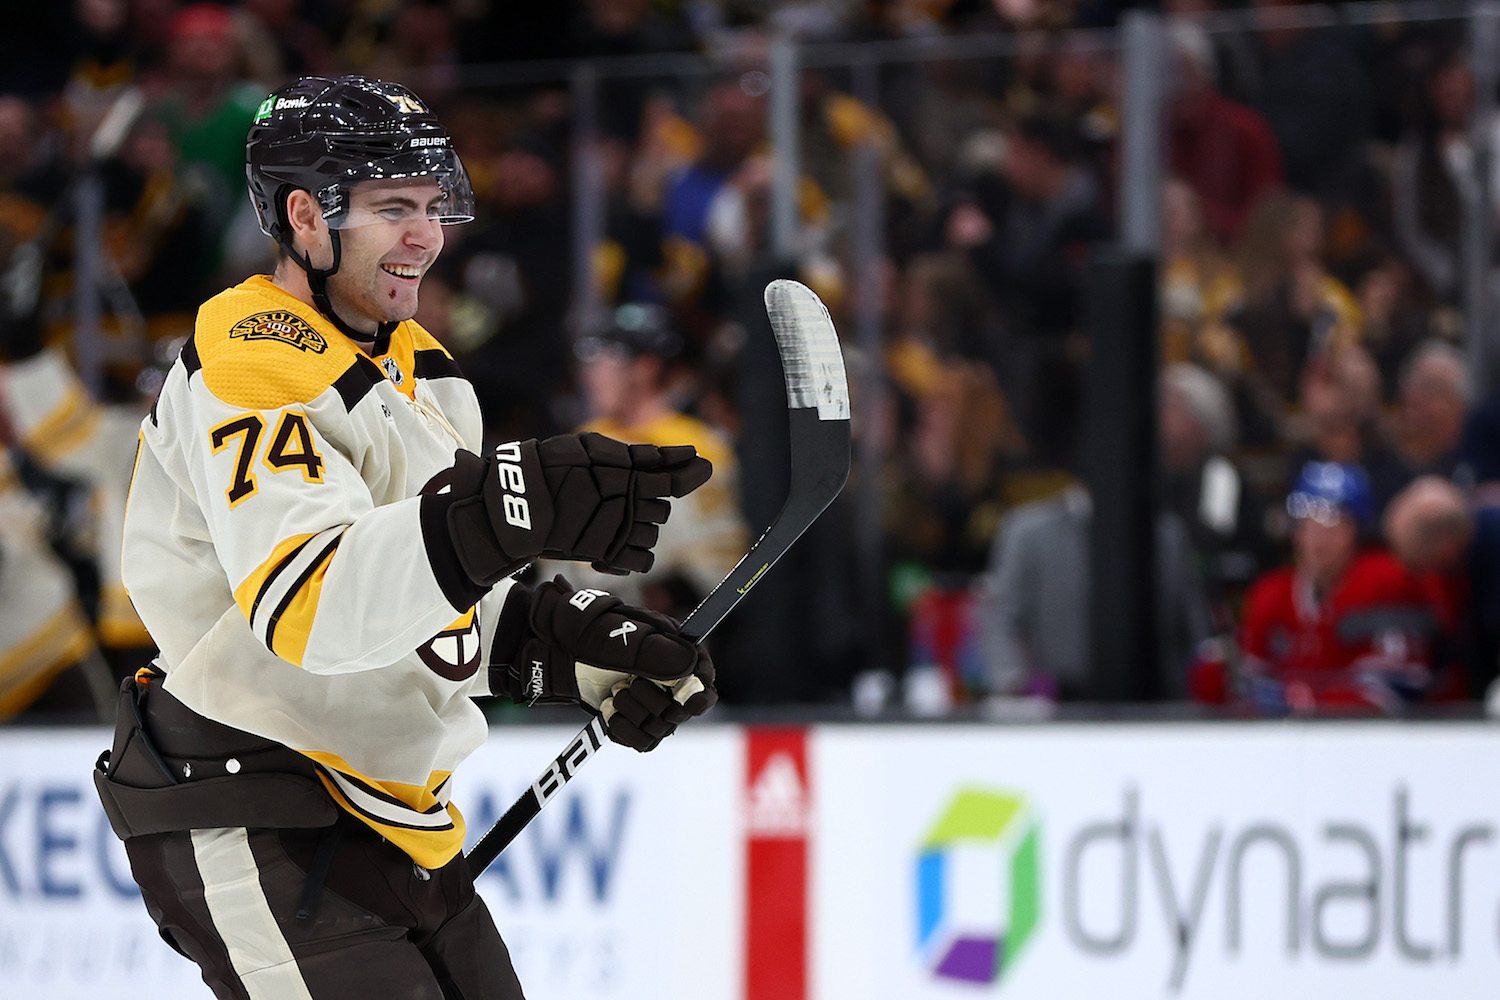 BOSTON, MASSACHUSETTS - JANUARY 20: Jake DeBrusk #74 of the Boston Bruins celebrates after assisting a goal scored by Pavel Zacha #18 against the Montreal Canadiens during the third period at TD Garden on January 20, 2024 in Boston, Massachusetts. The Bruins defeat the Canadiens 9-4. (Photo by Maddie Meyer/Getty Images)